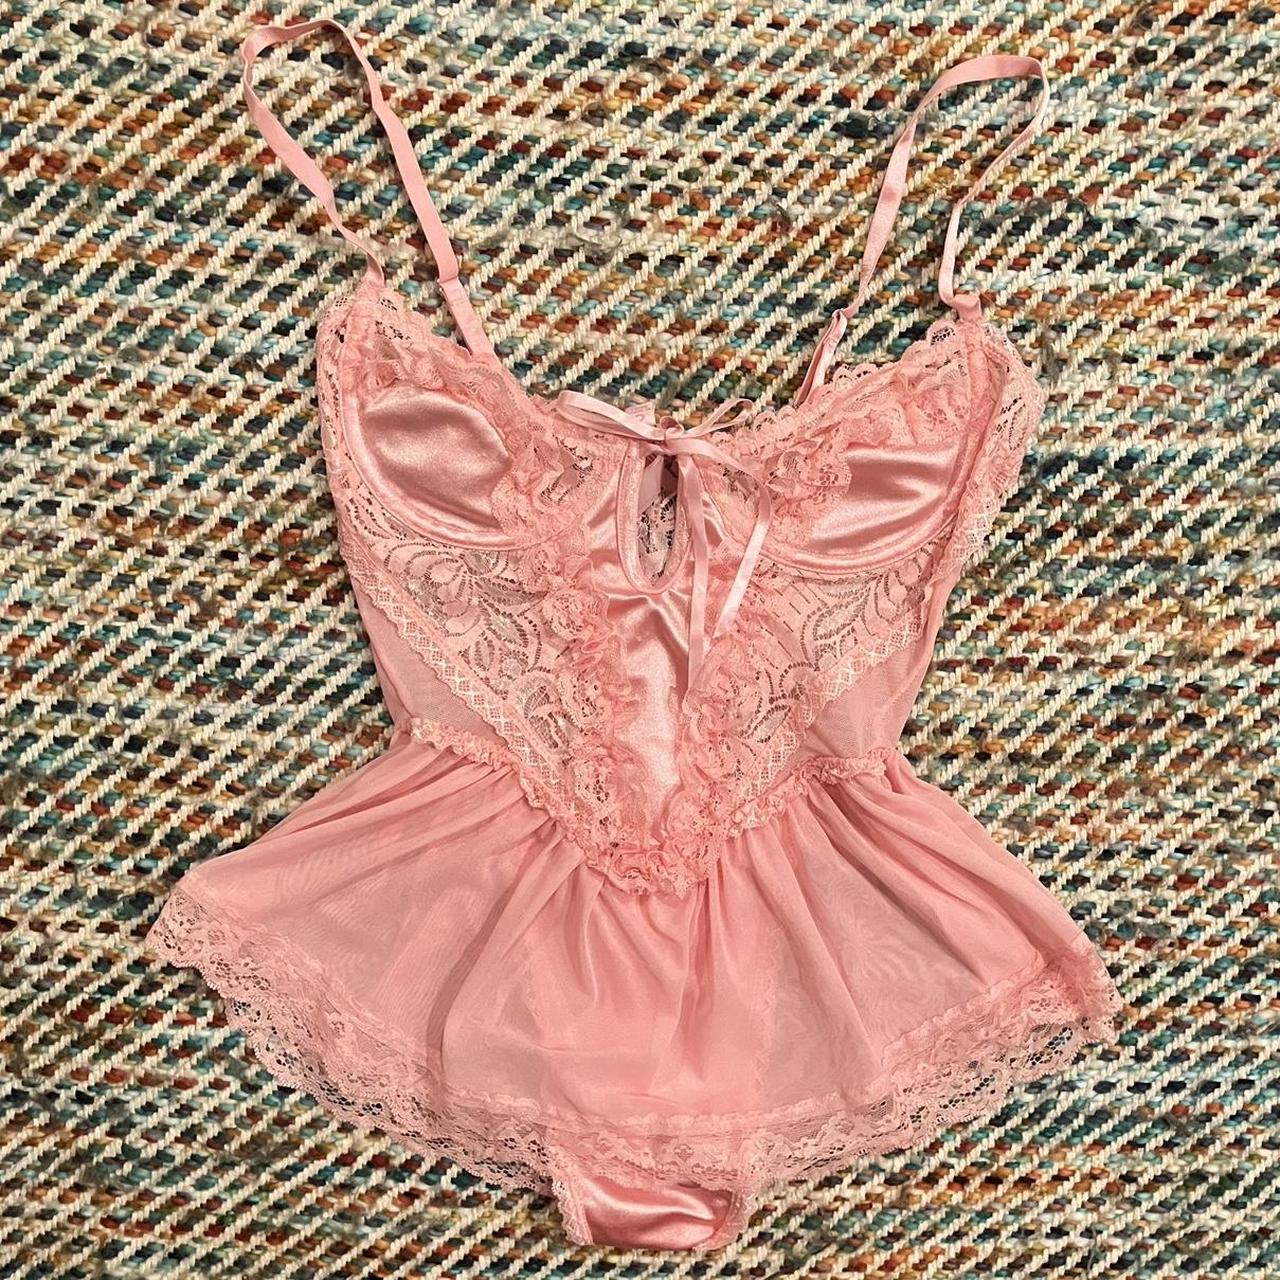 red lace bralette cami bustier top not sheer around - Depop